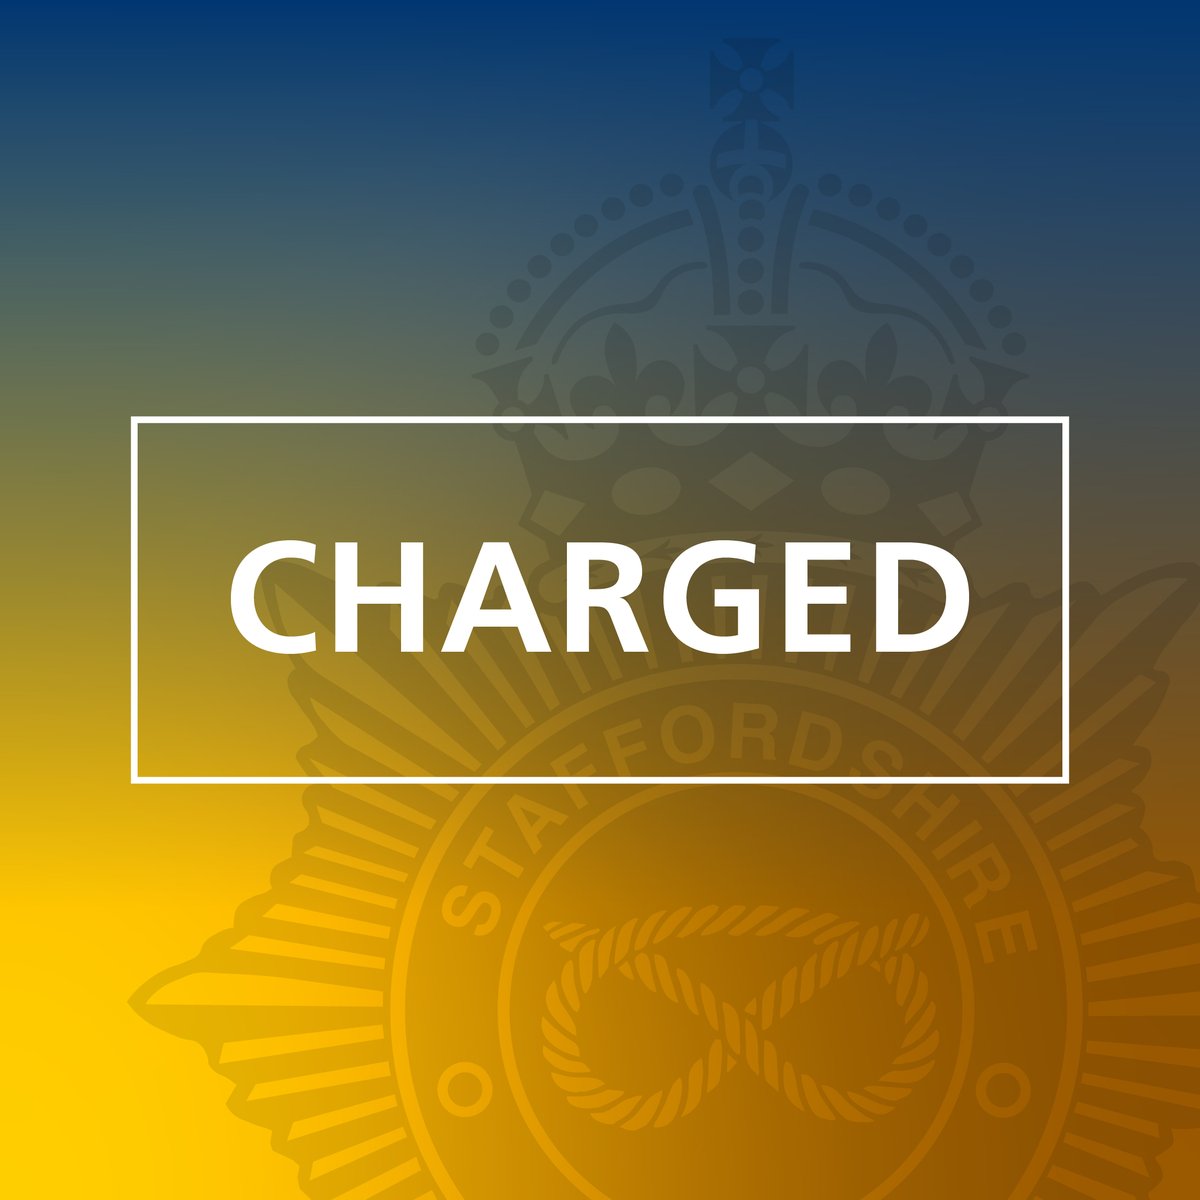 #OpTarget | A man has been charged with drug supply offences following a number of searches in Burton-on-Trent. Read more: orlo.uk/hK3Vl